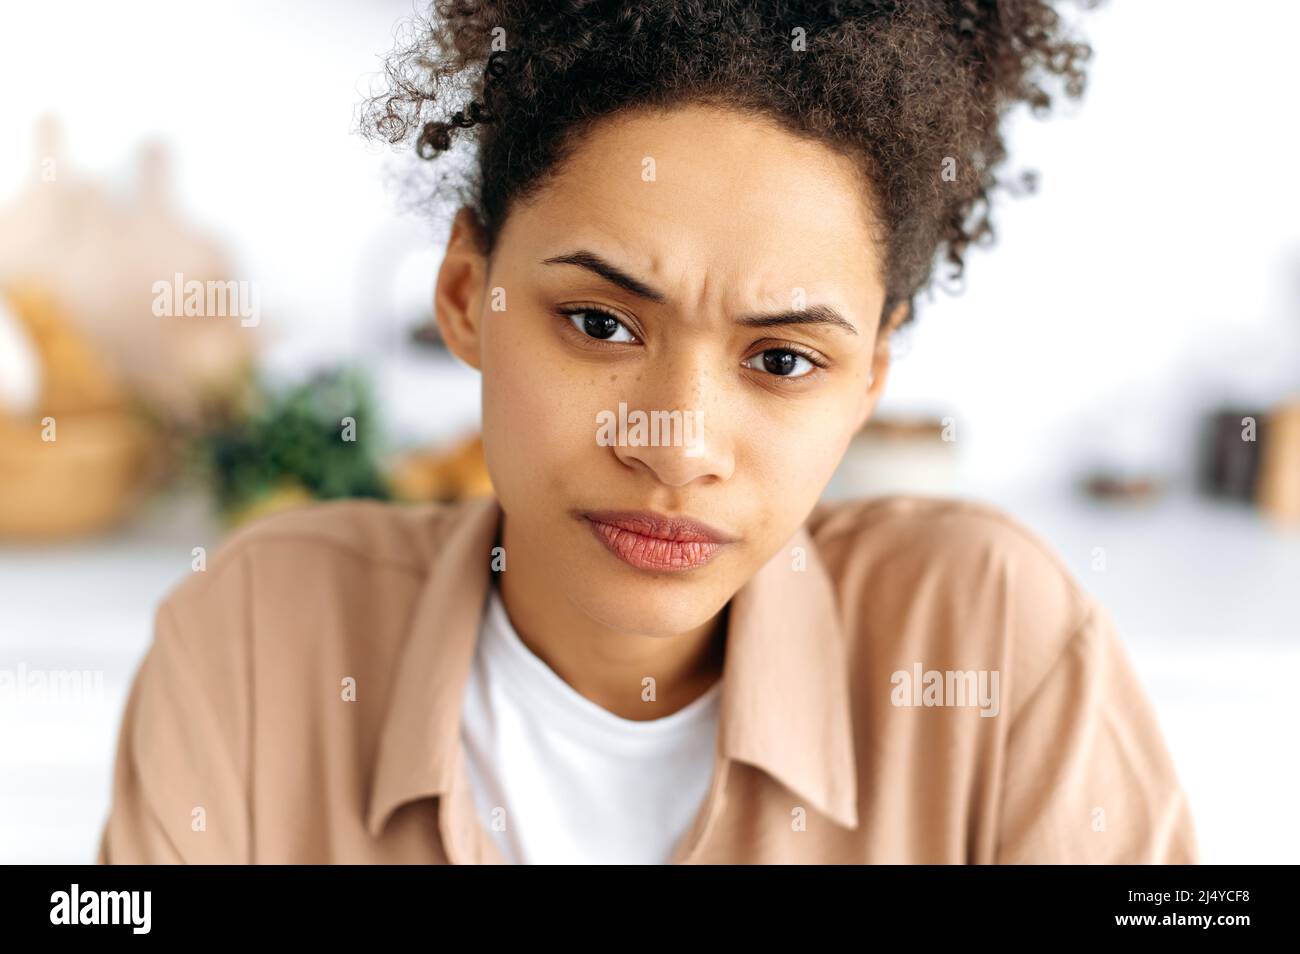 Close-up face of a frowning puzzled african american curly-haired millennial girl with freckles, knitted her eyebrows, looks unhappily at the camera, feels misunderstanding, anxiety Stock Photo